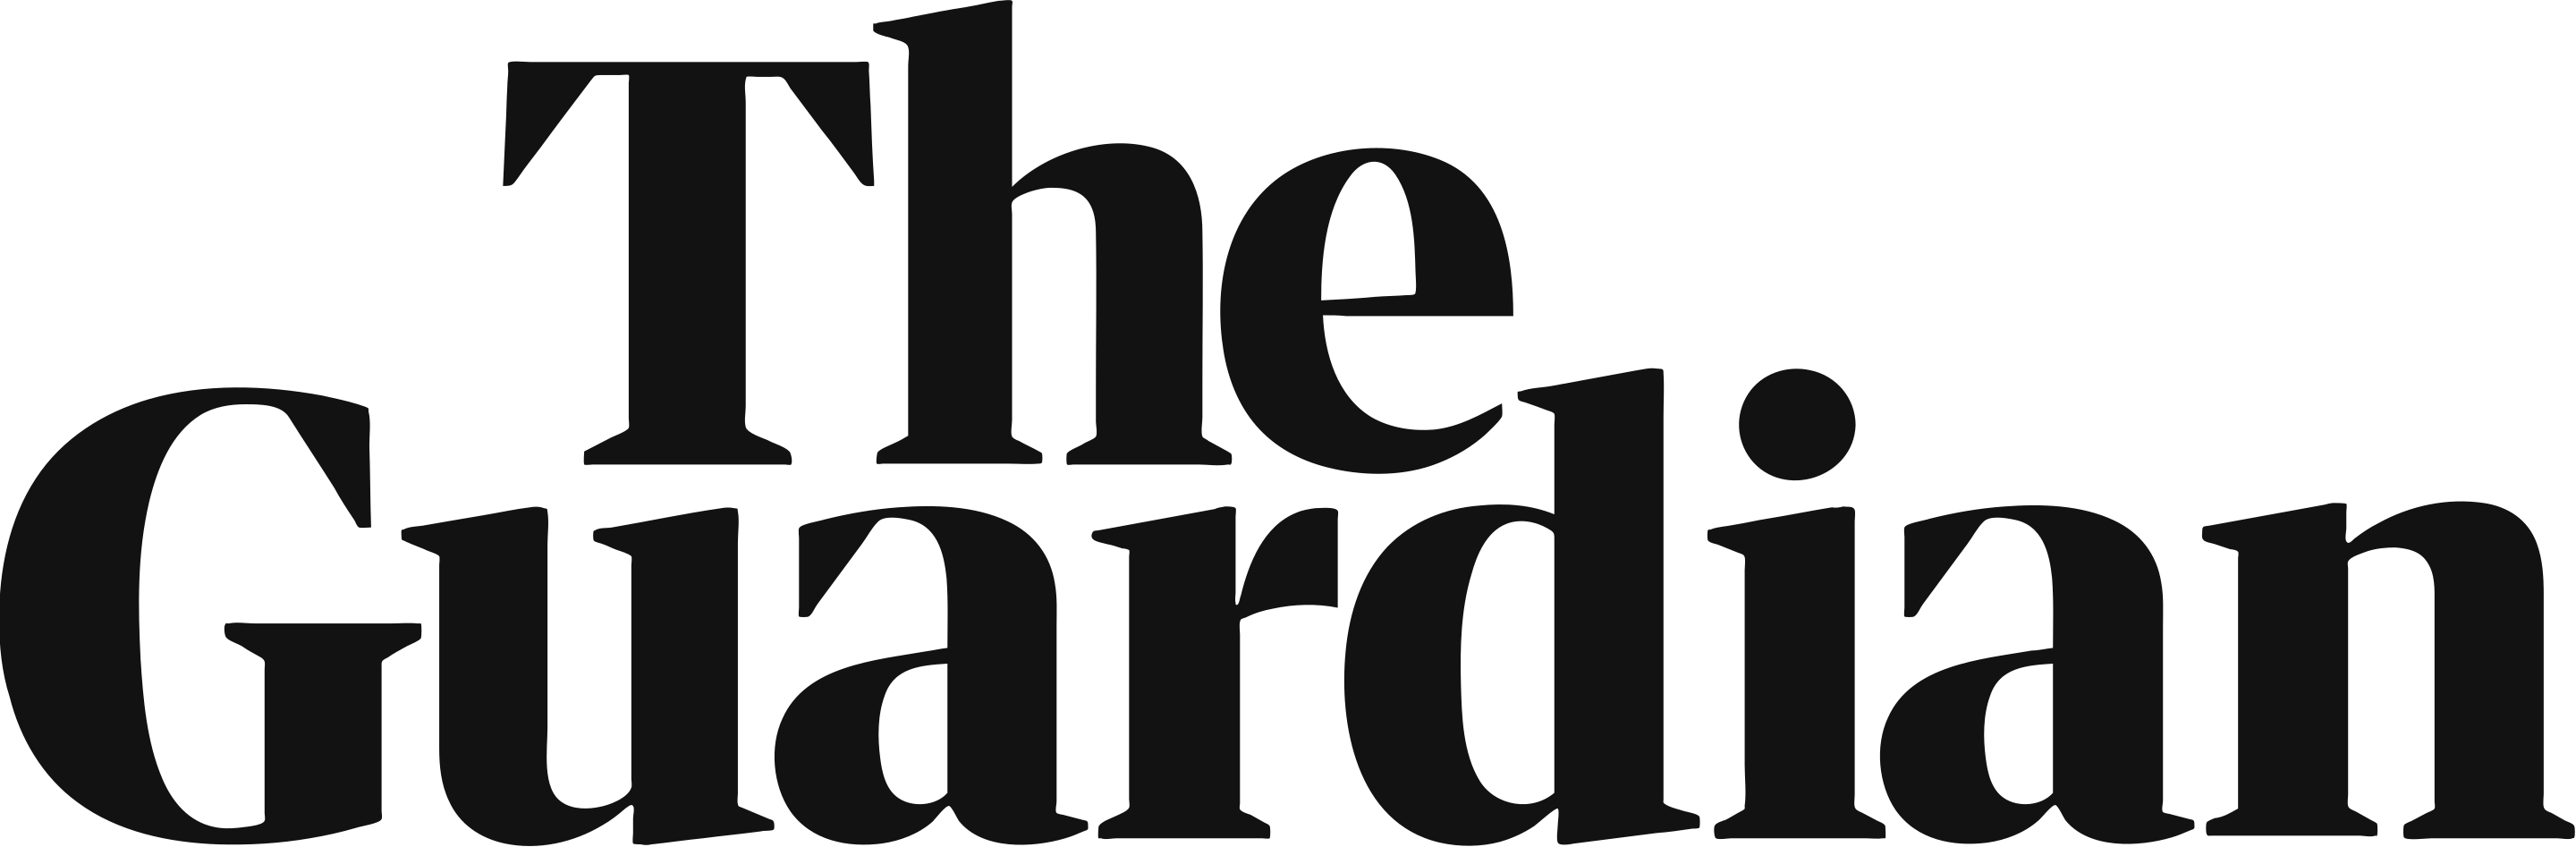 Logo of The Guardian